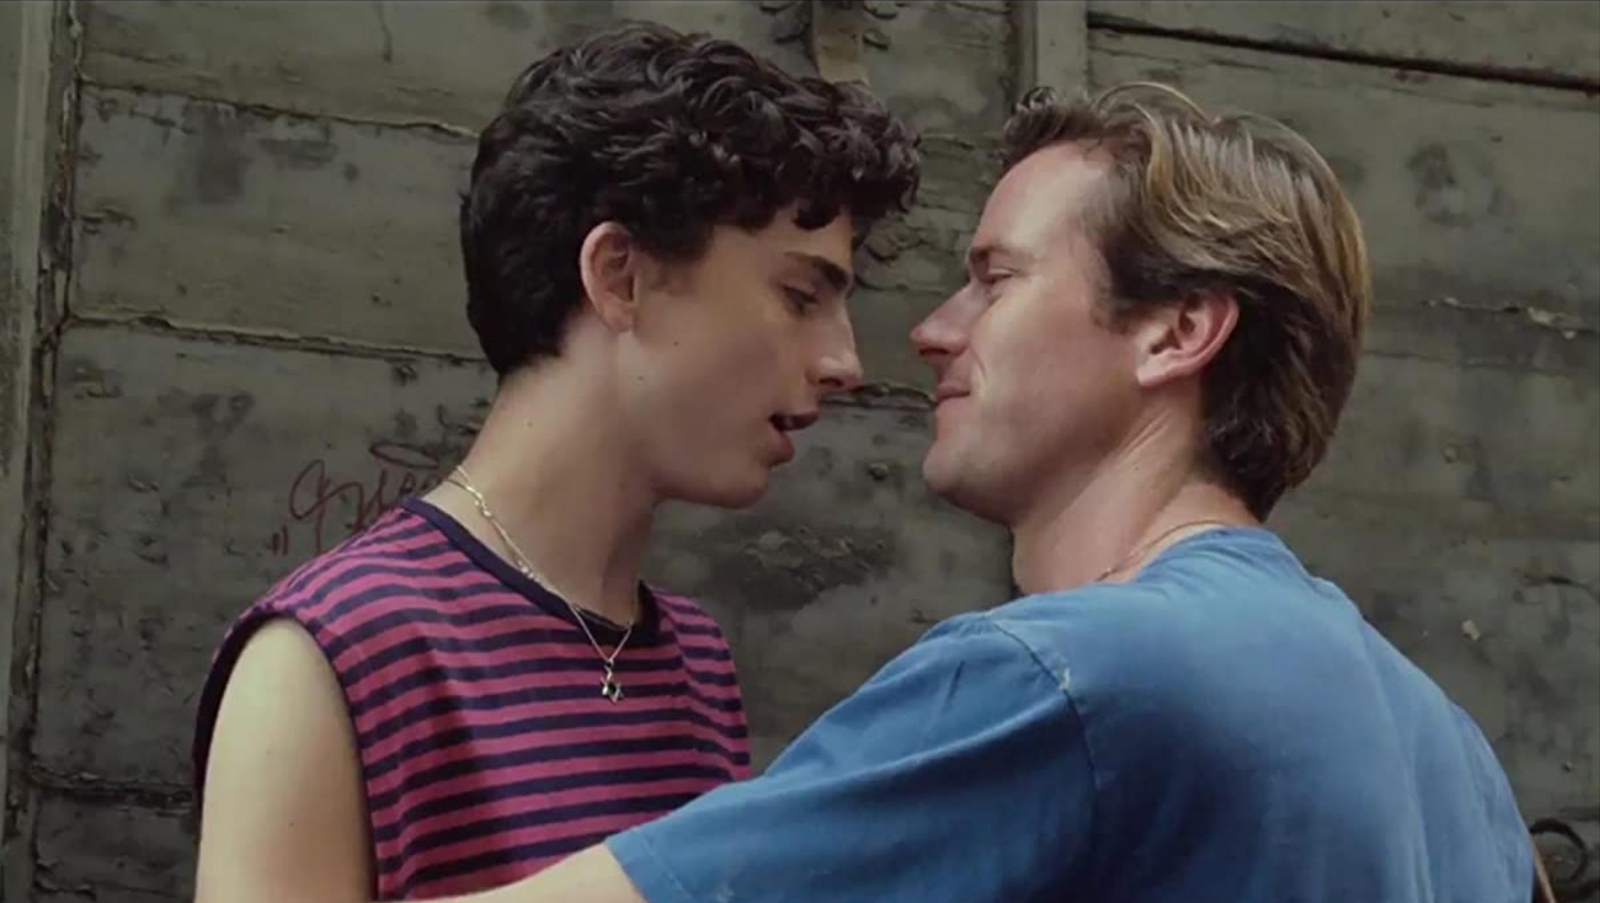 Timothée Chalamet and Armie Hammer in "Call Me by Your Name" (2017)